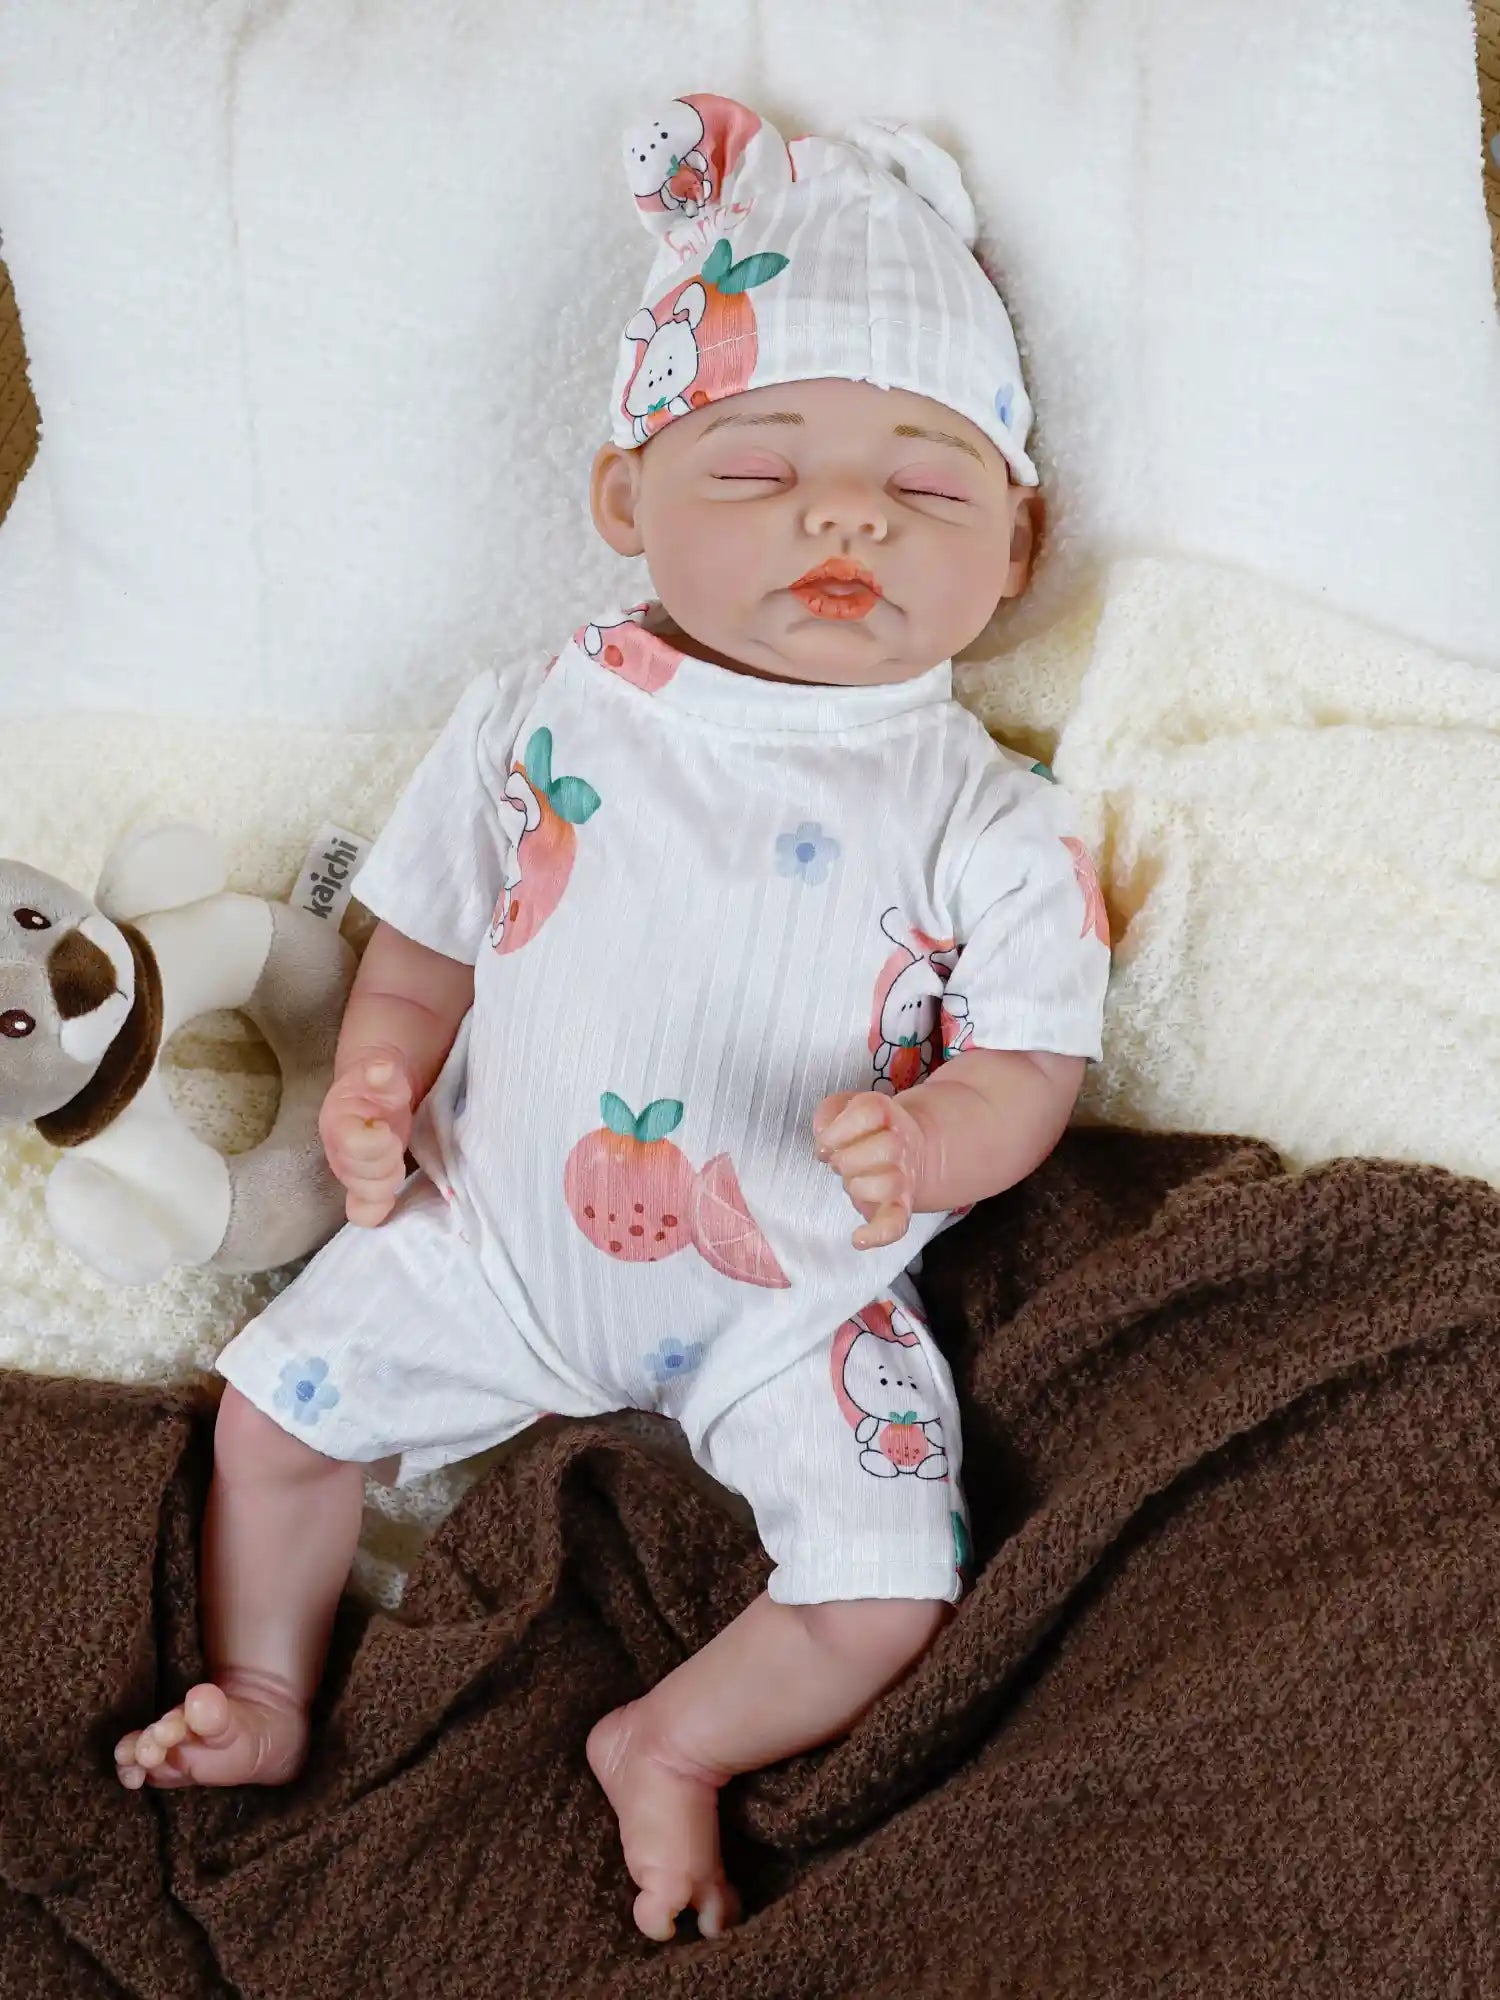 Lifelike reborn baby doll dressed in a white, fruit-print romper and a matching "bunny" hat, lying next to a plush koala toy, with a teething ring nearby